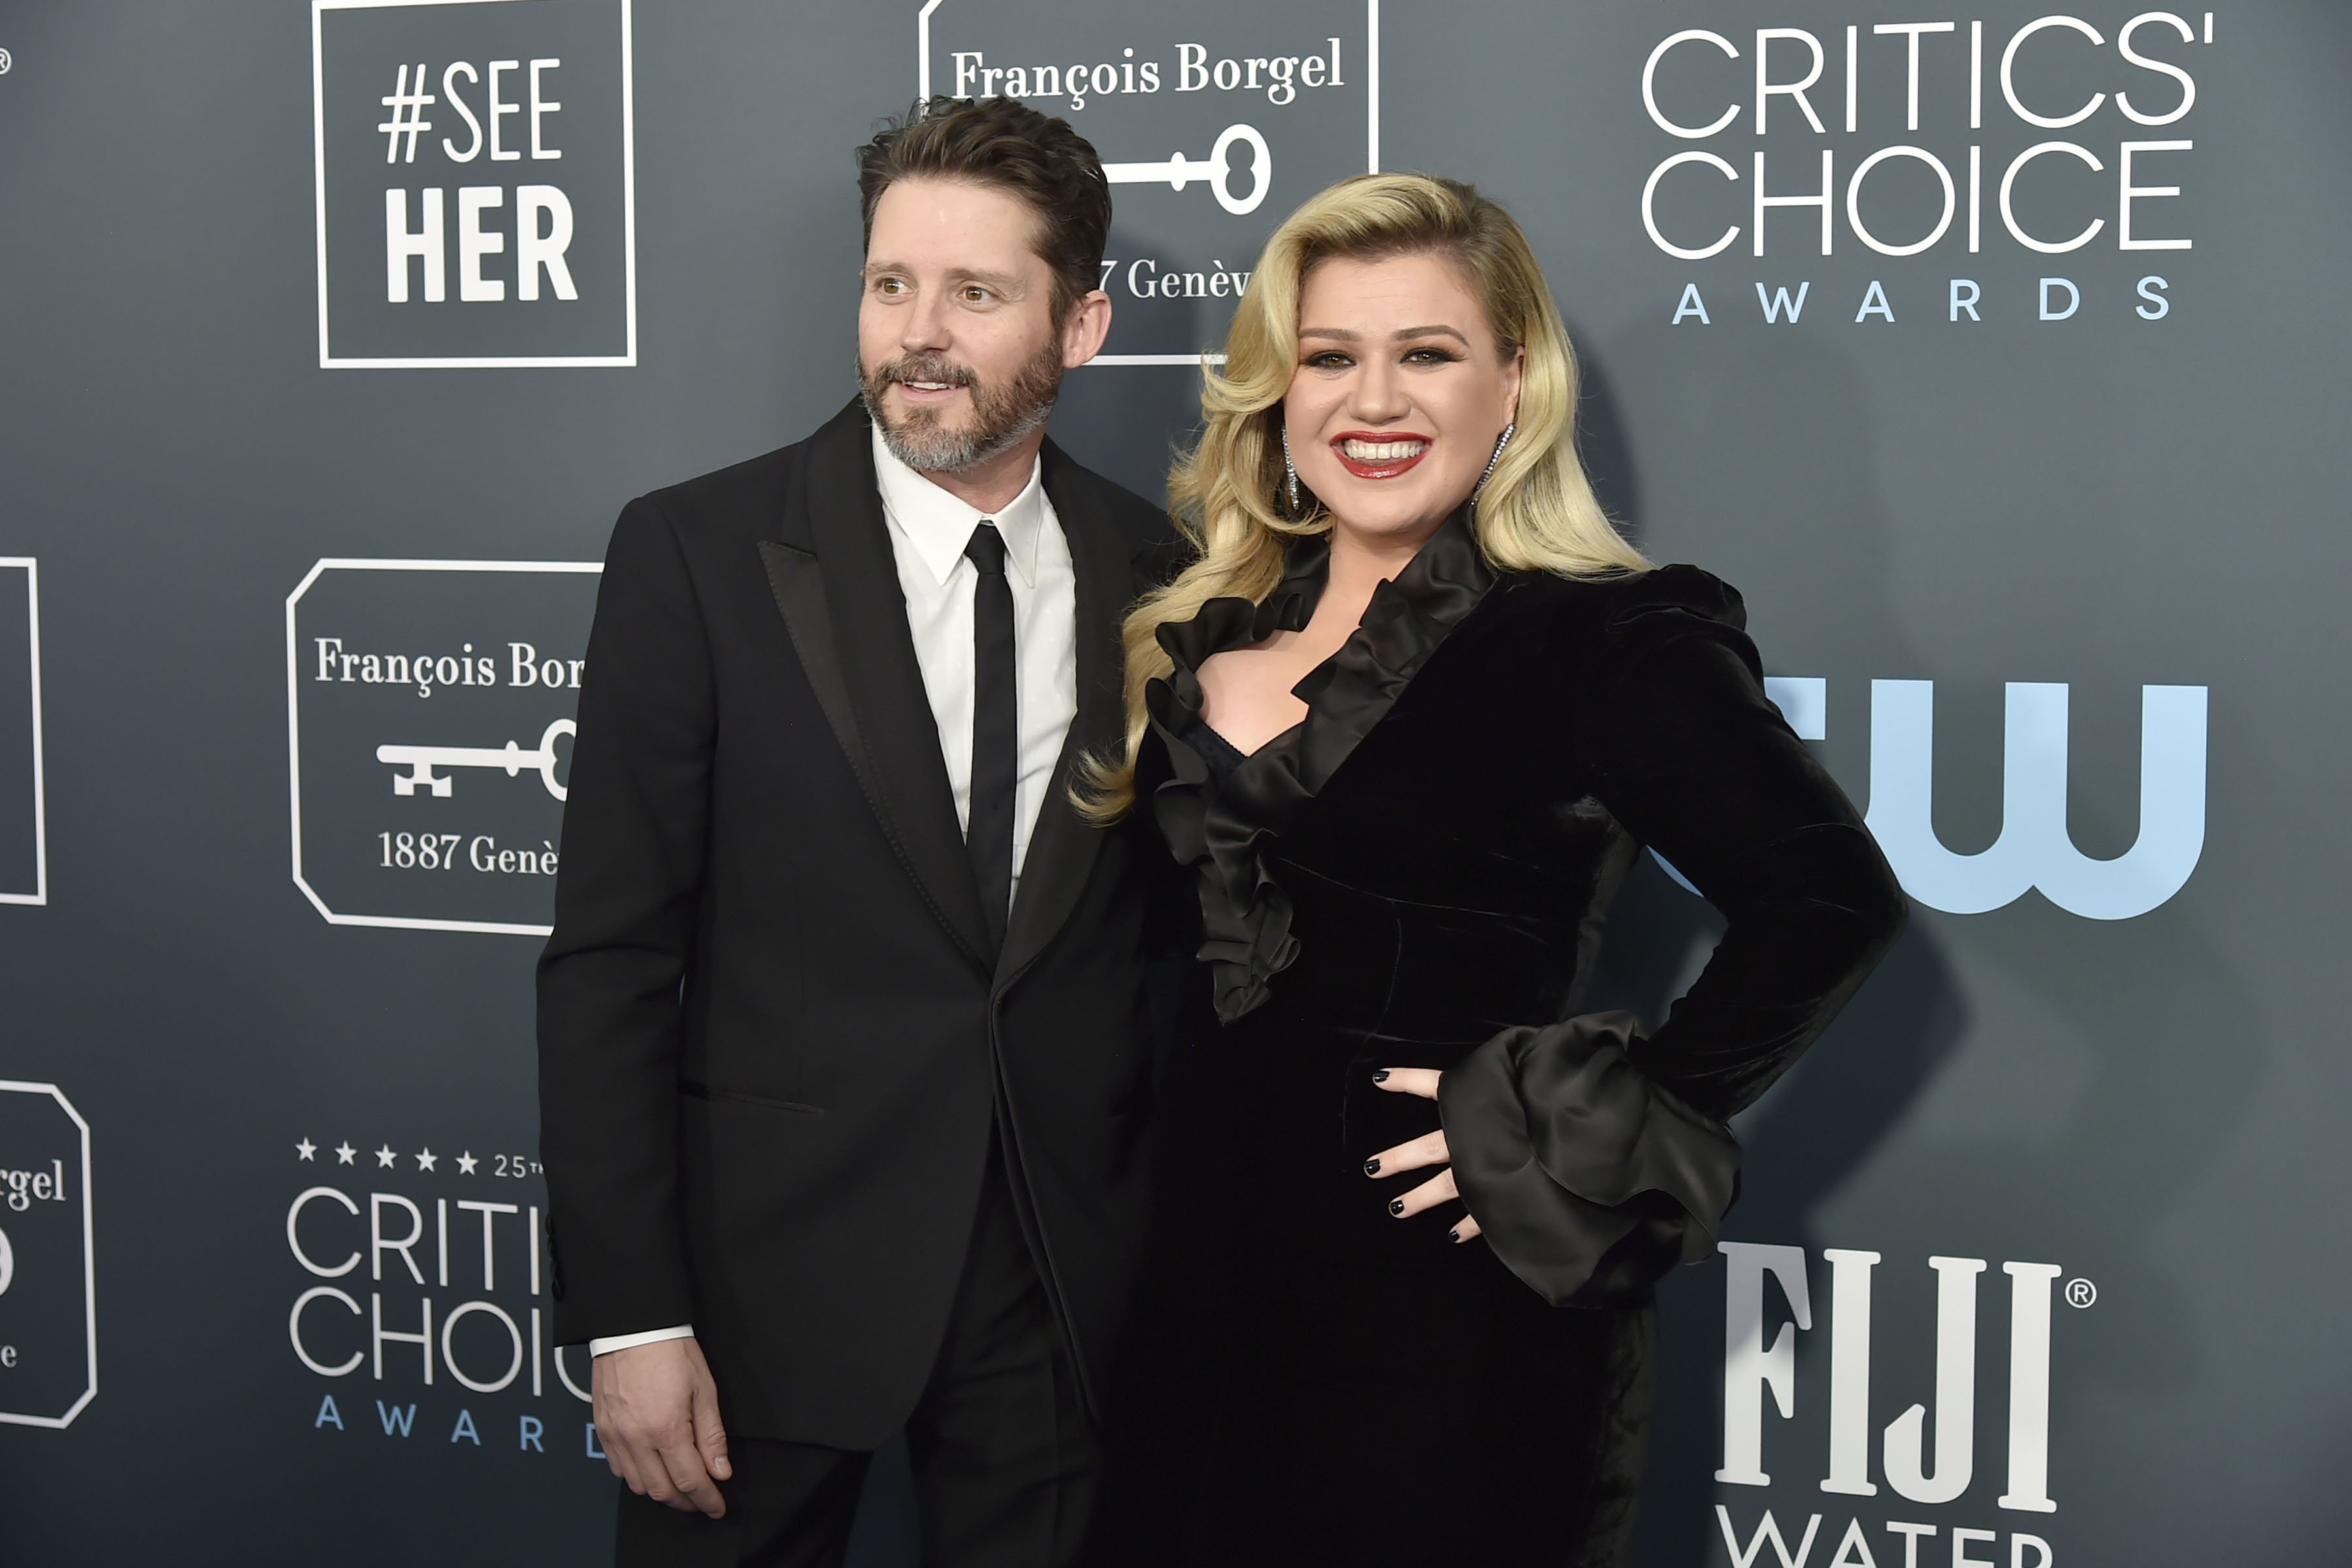 Brandon Blackstock and Kelly Clarkson attend the Critics' Choice Awards in Santa Monica, California on January 12, 2020 | Photo: Getty Images